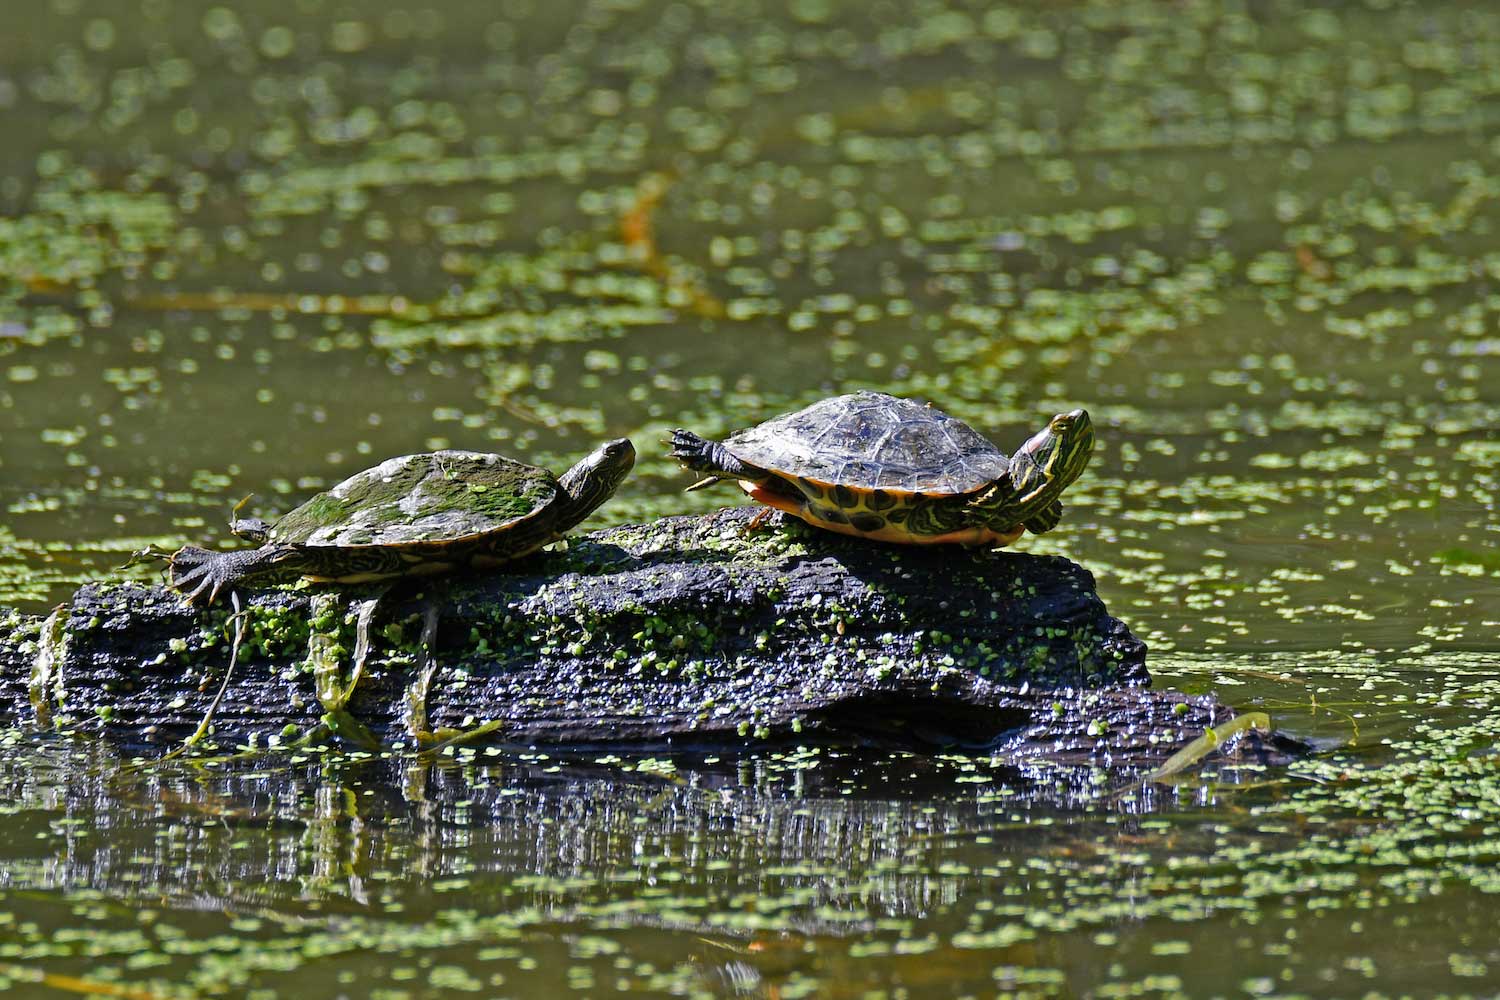 Two painted turtles basking on a log in a pond strewn with duckweed.